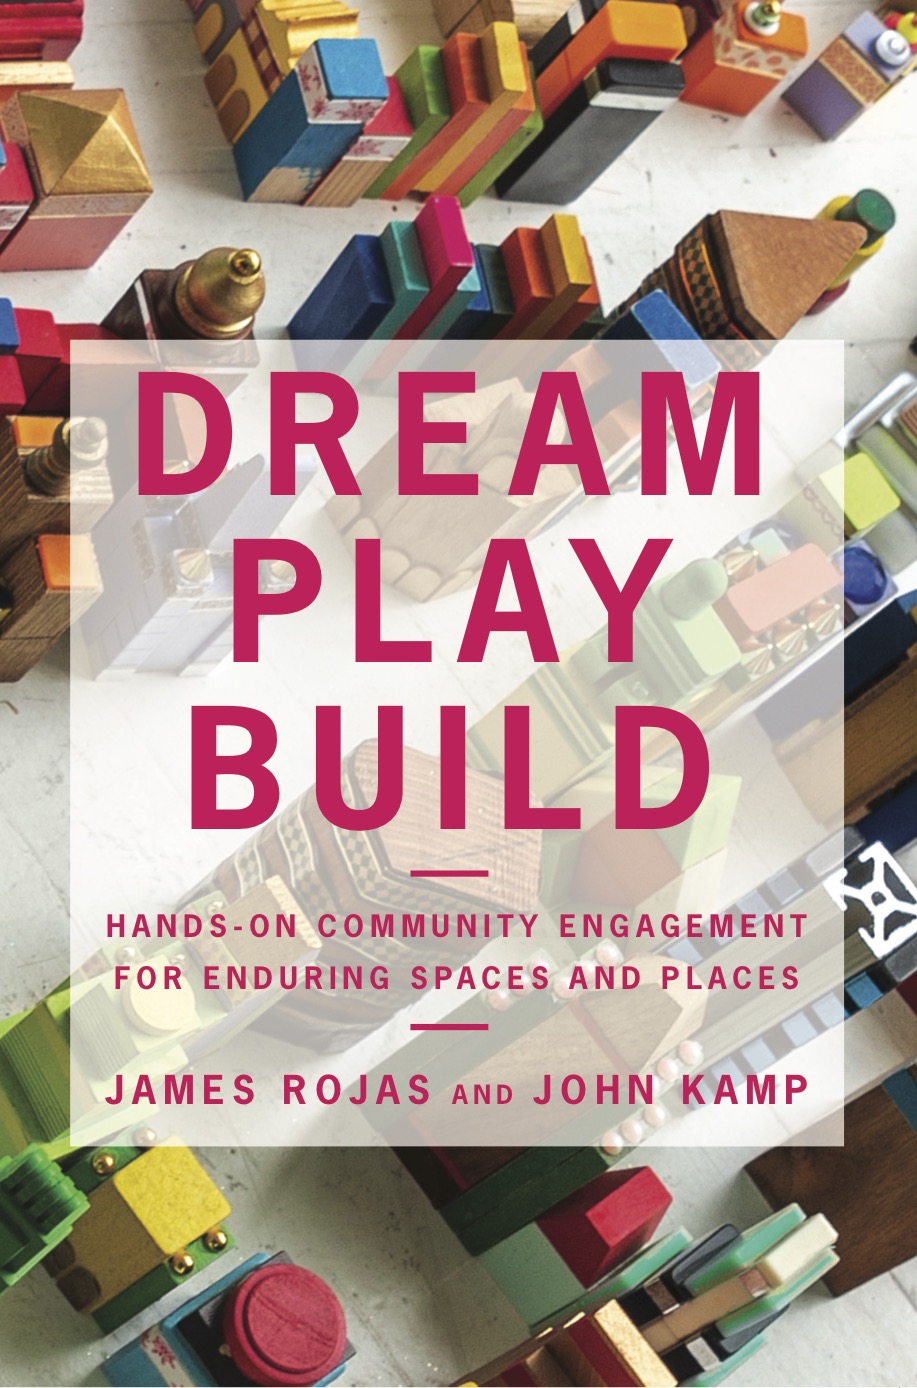 The cover of the new book by John Kamp and James Rojas, Dream Play Build, published by Island Press.